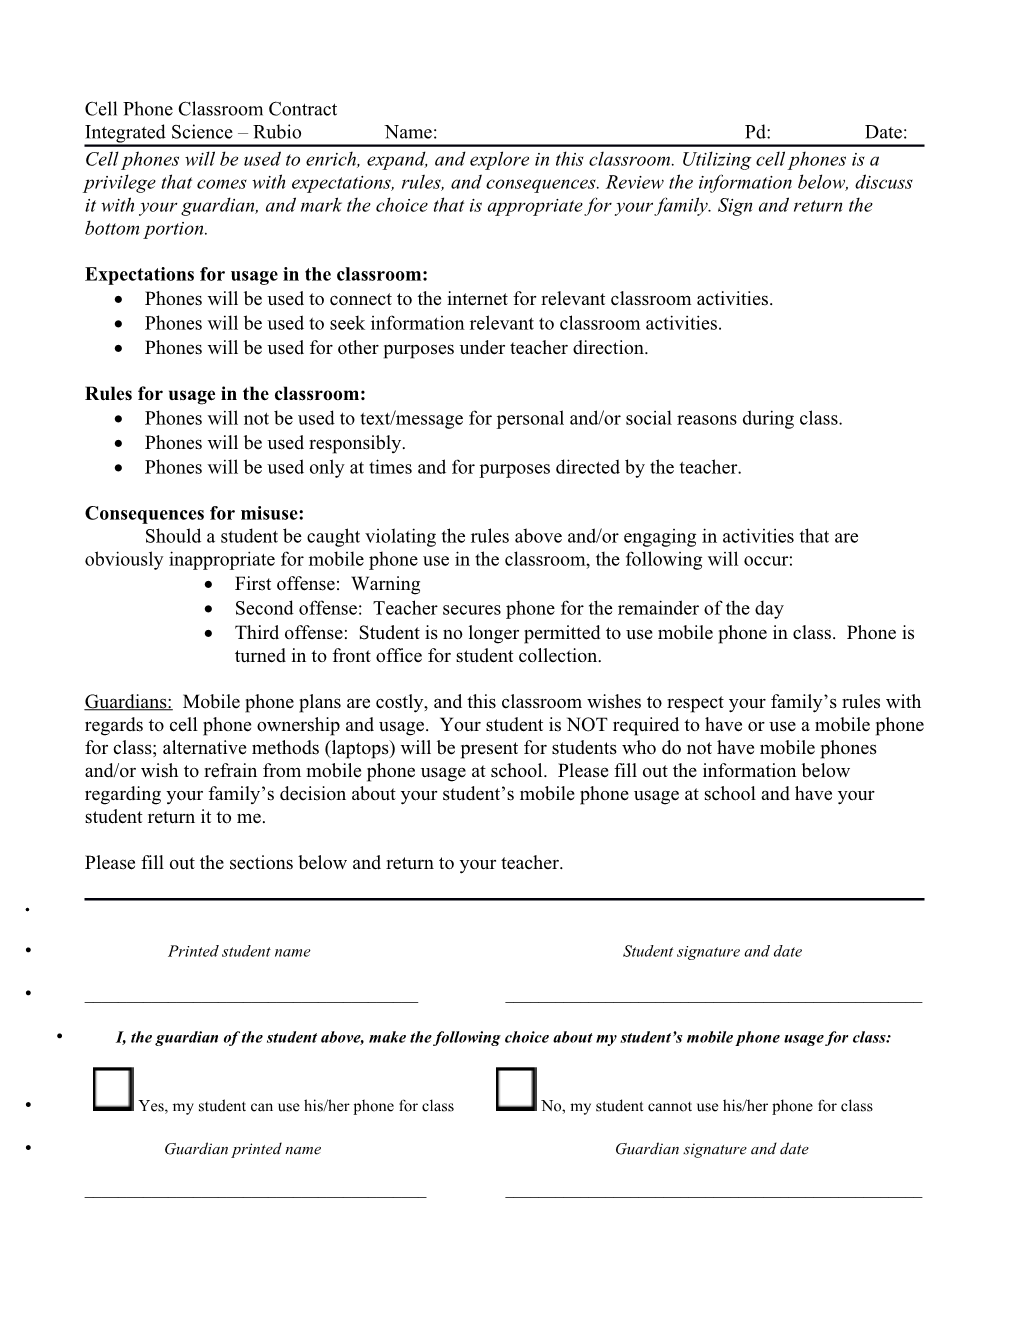 Cell Phone Classroom Contract